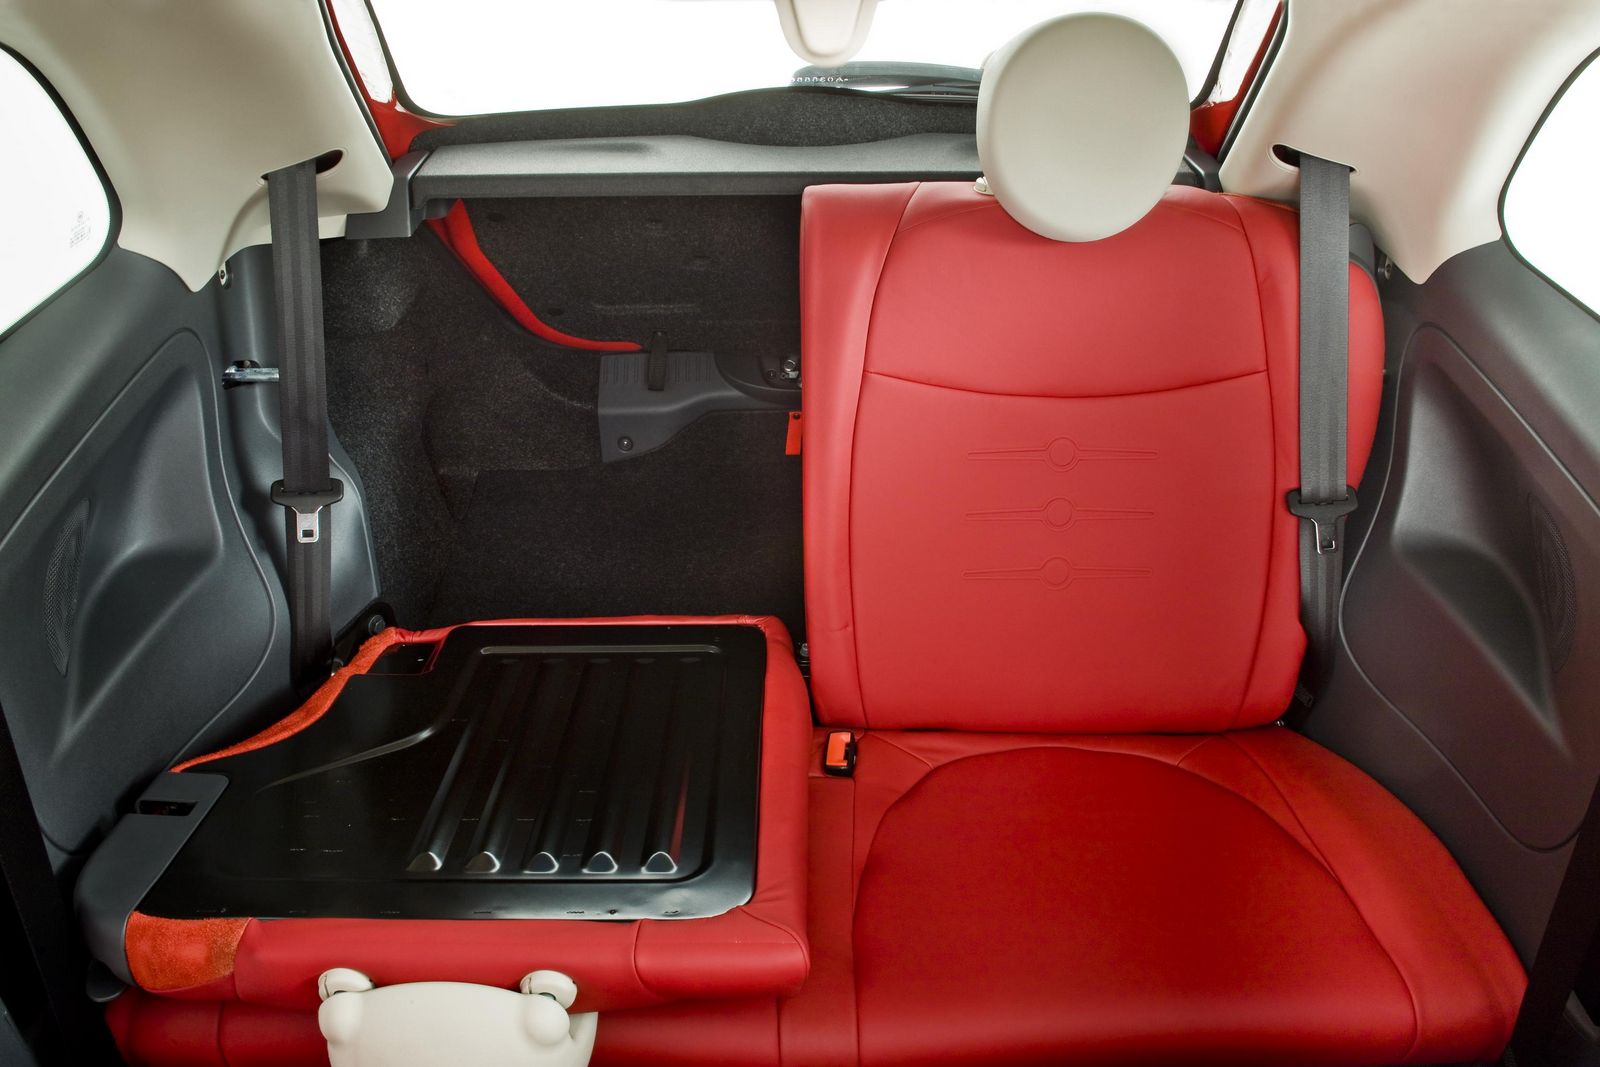 Inside the new Fiat 500